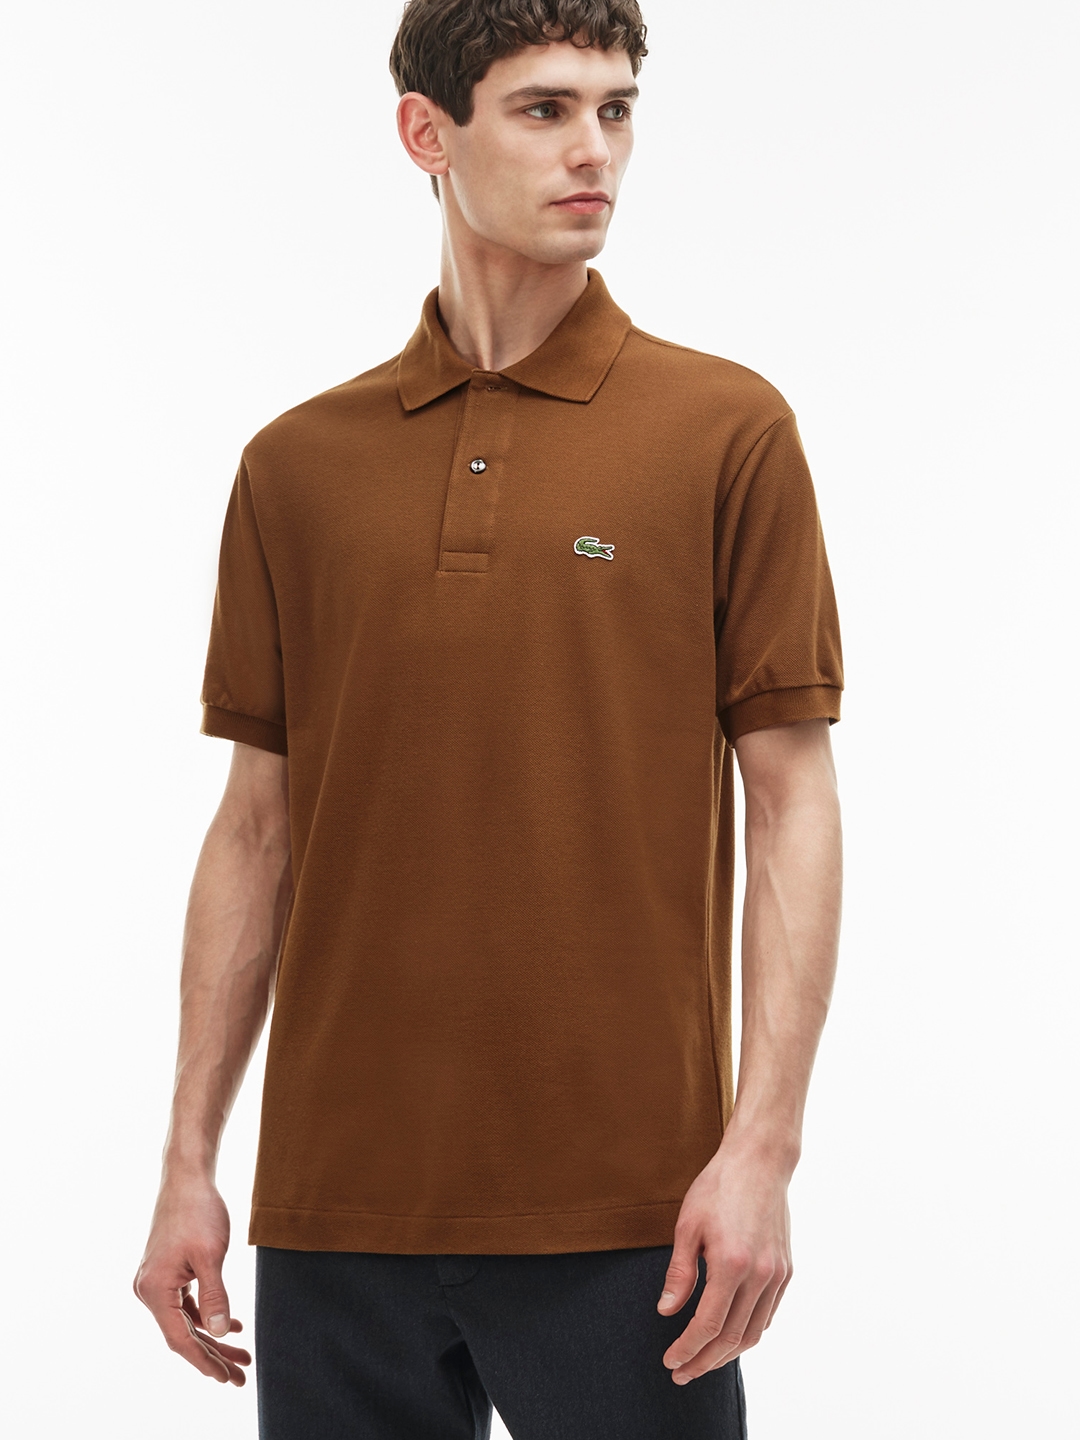 lacoste brown shirt